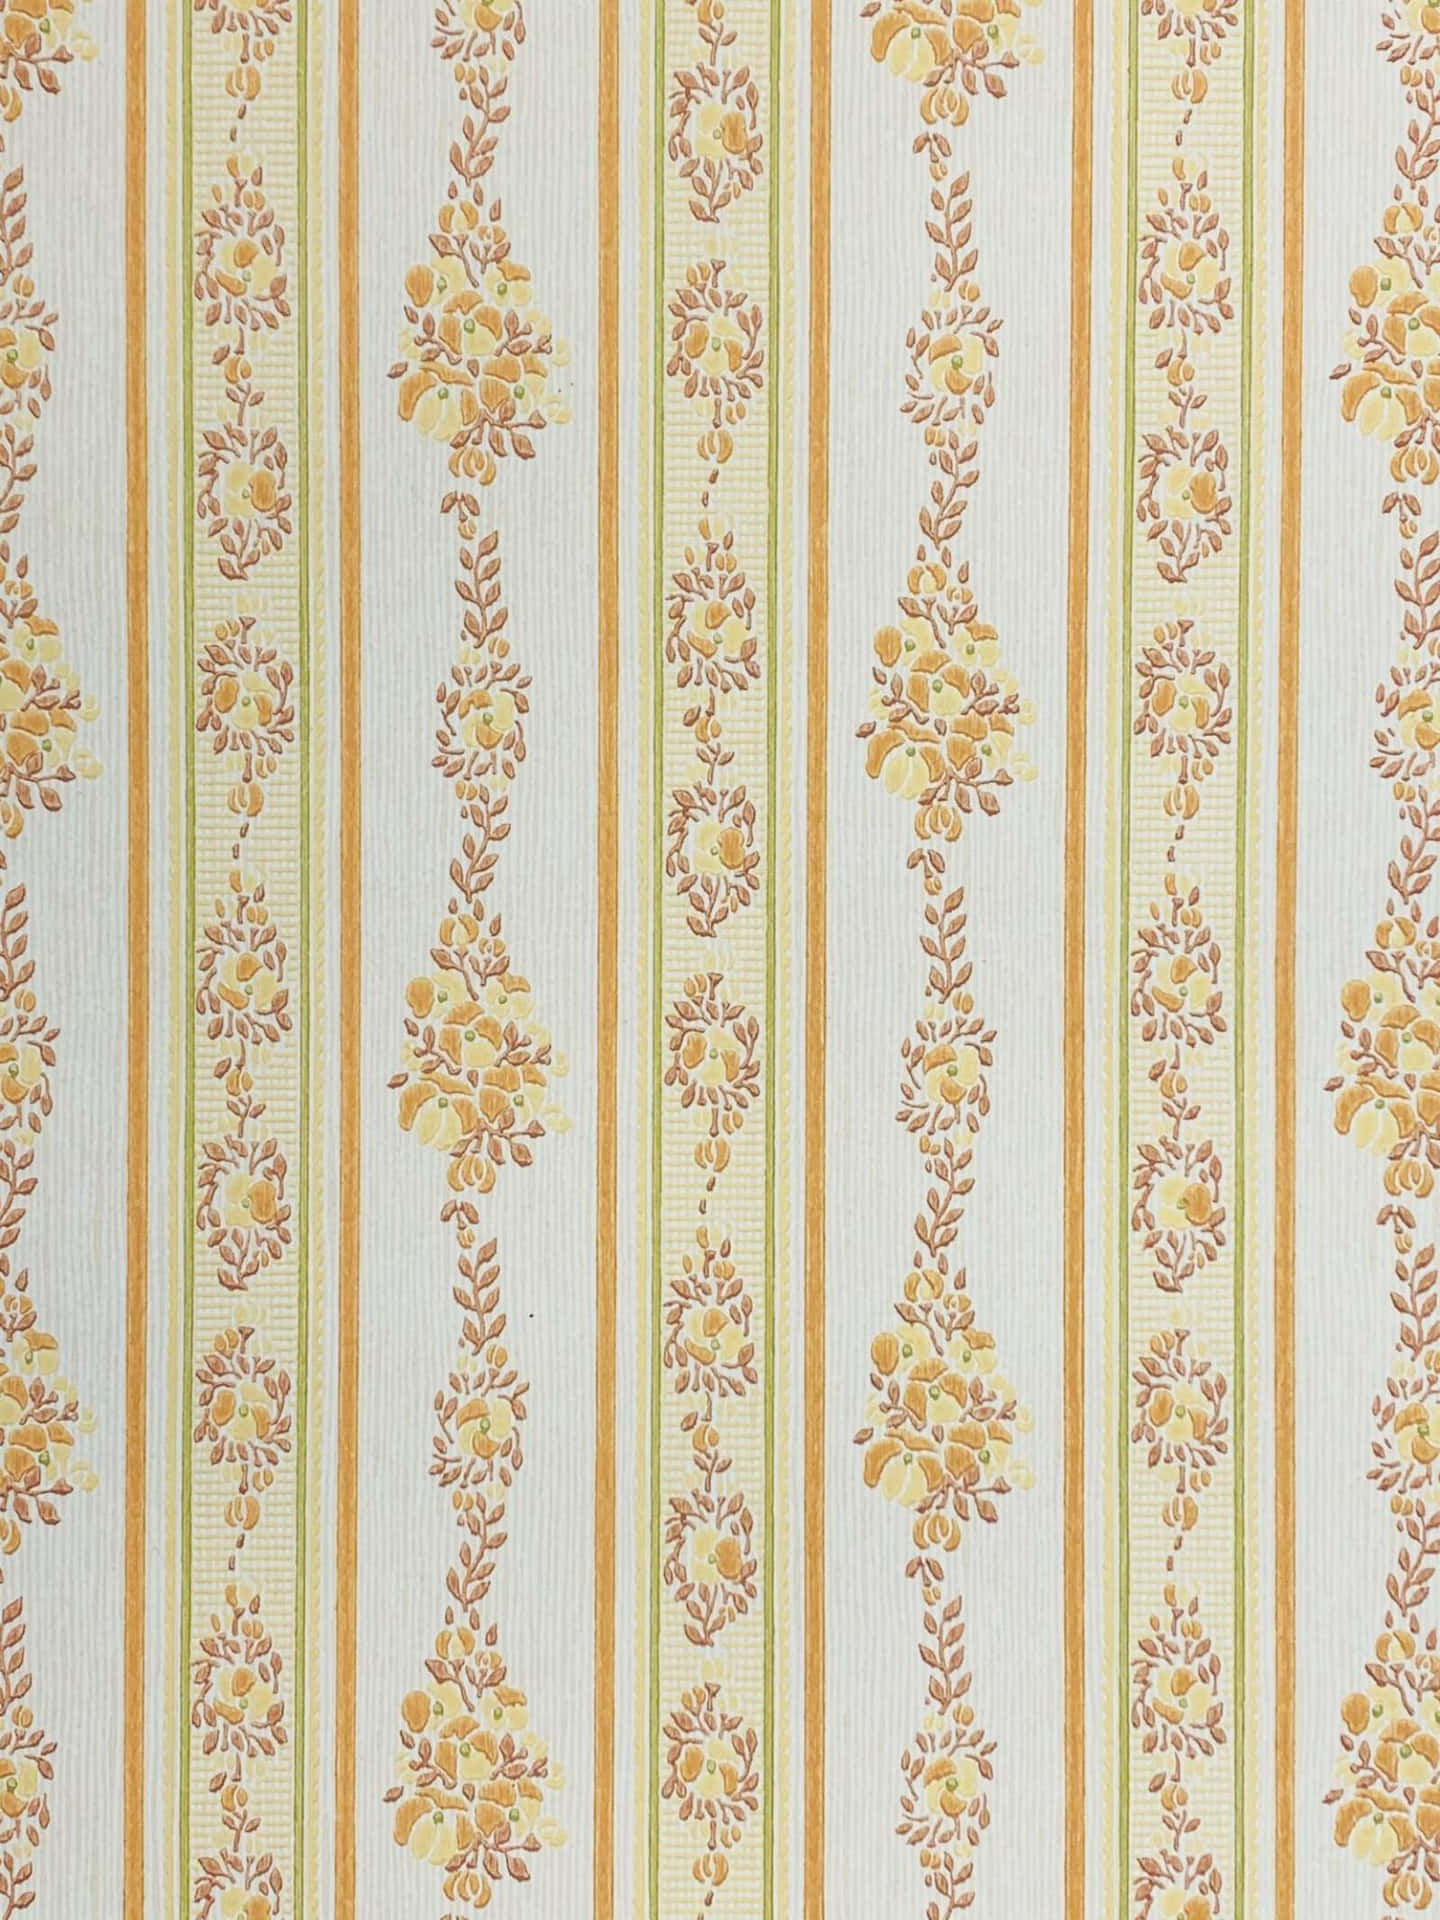 A Yellow And White Striped Wallpaper With Floral Designs Wallpaper